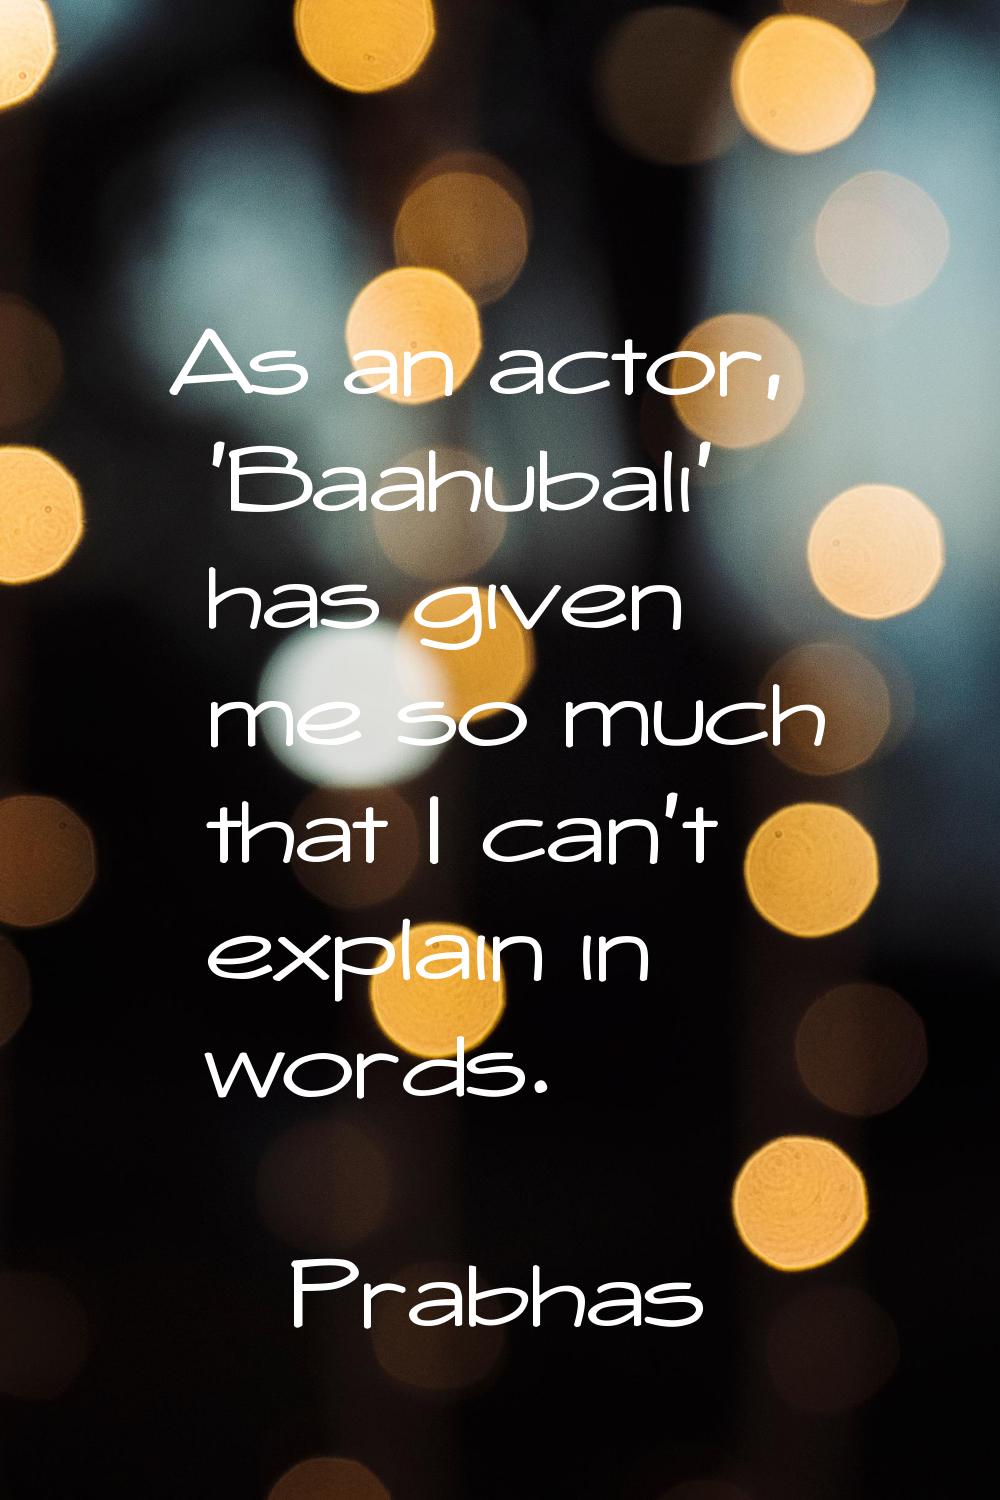 As an actor, 'Baahubali' has given me so much that I can't explain in words.